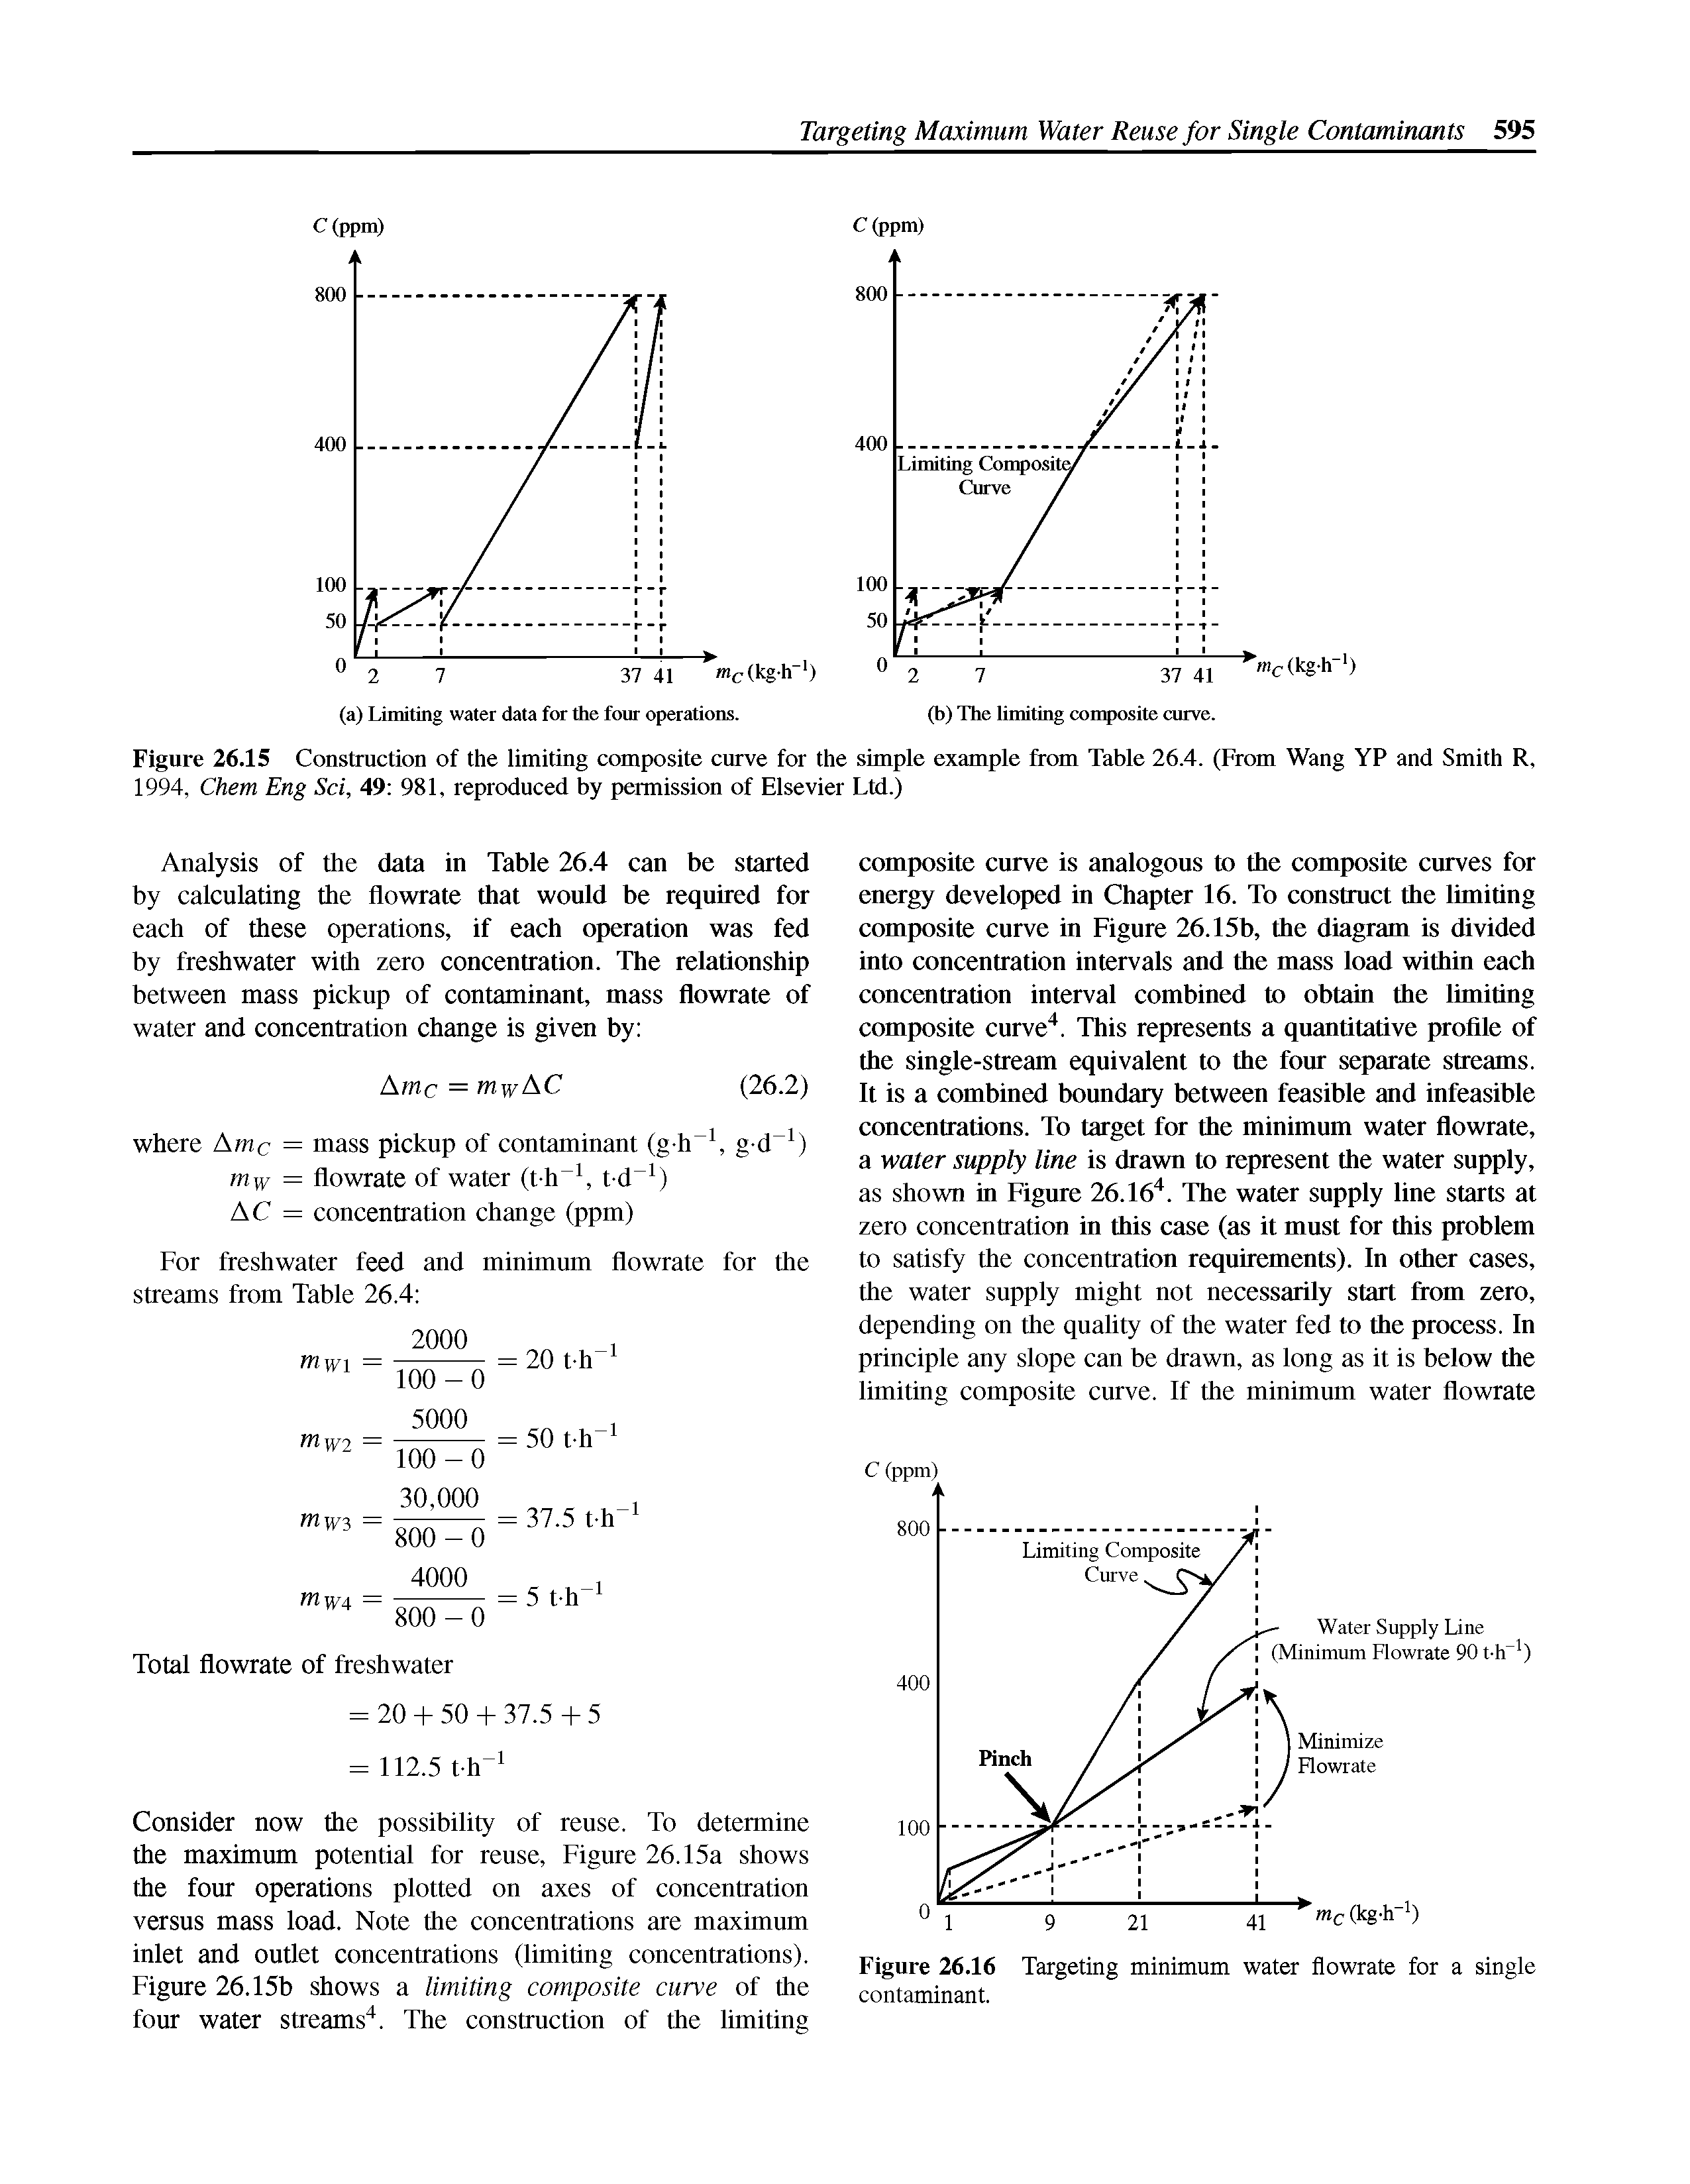 Figure 26.15 Construction of the limiting composite curve for the simple example from Table 26.4. (From Wang YP and Smith R, 1994, Chem Eng Sci, 49 981, reproduced by permission of Elsevier Ltd.)...